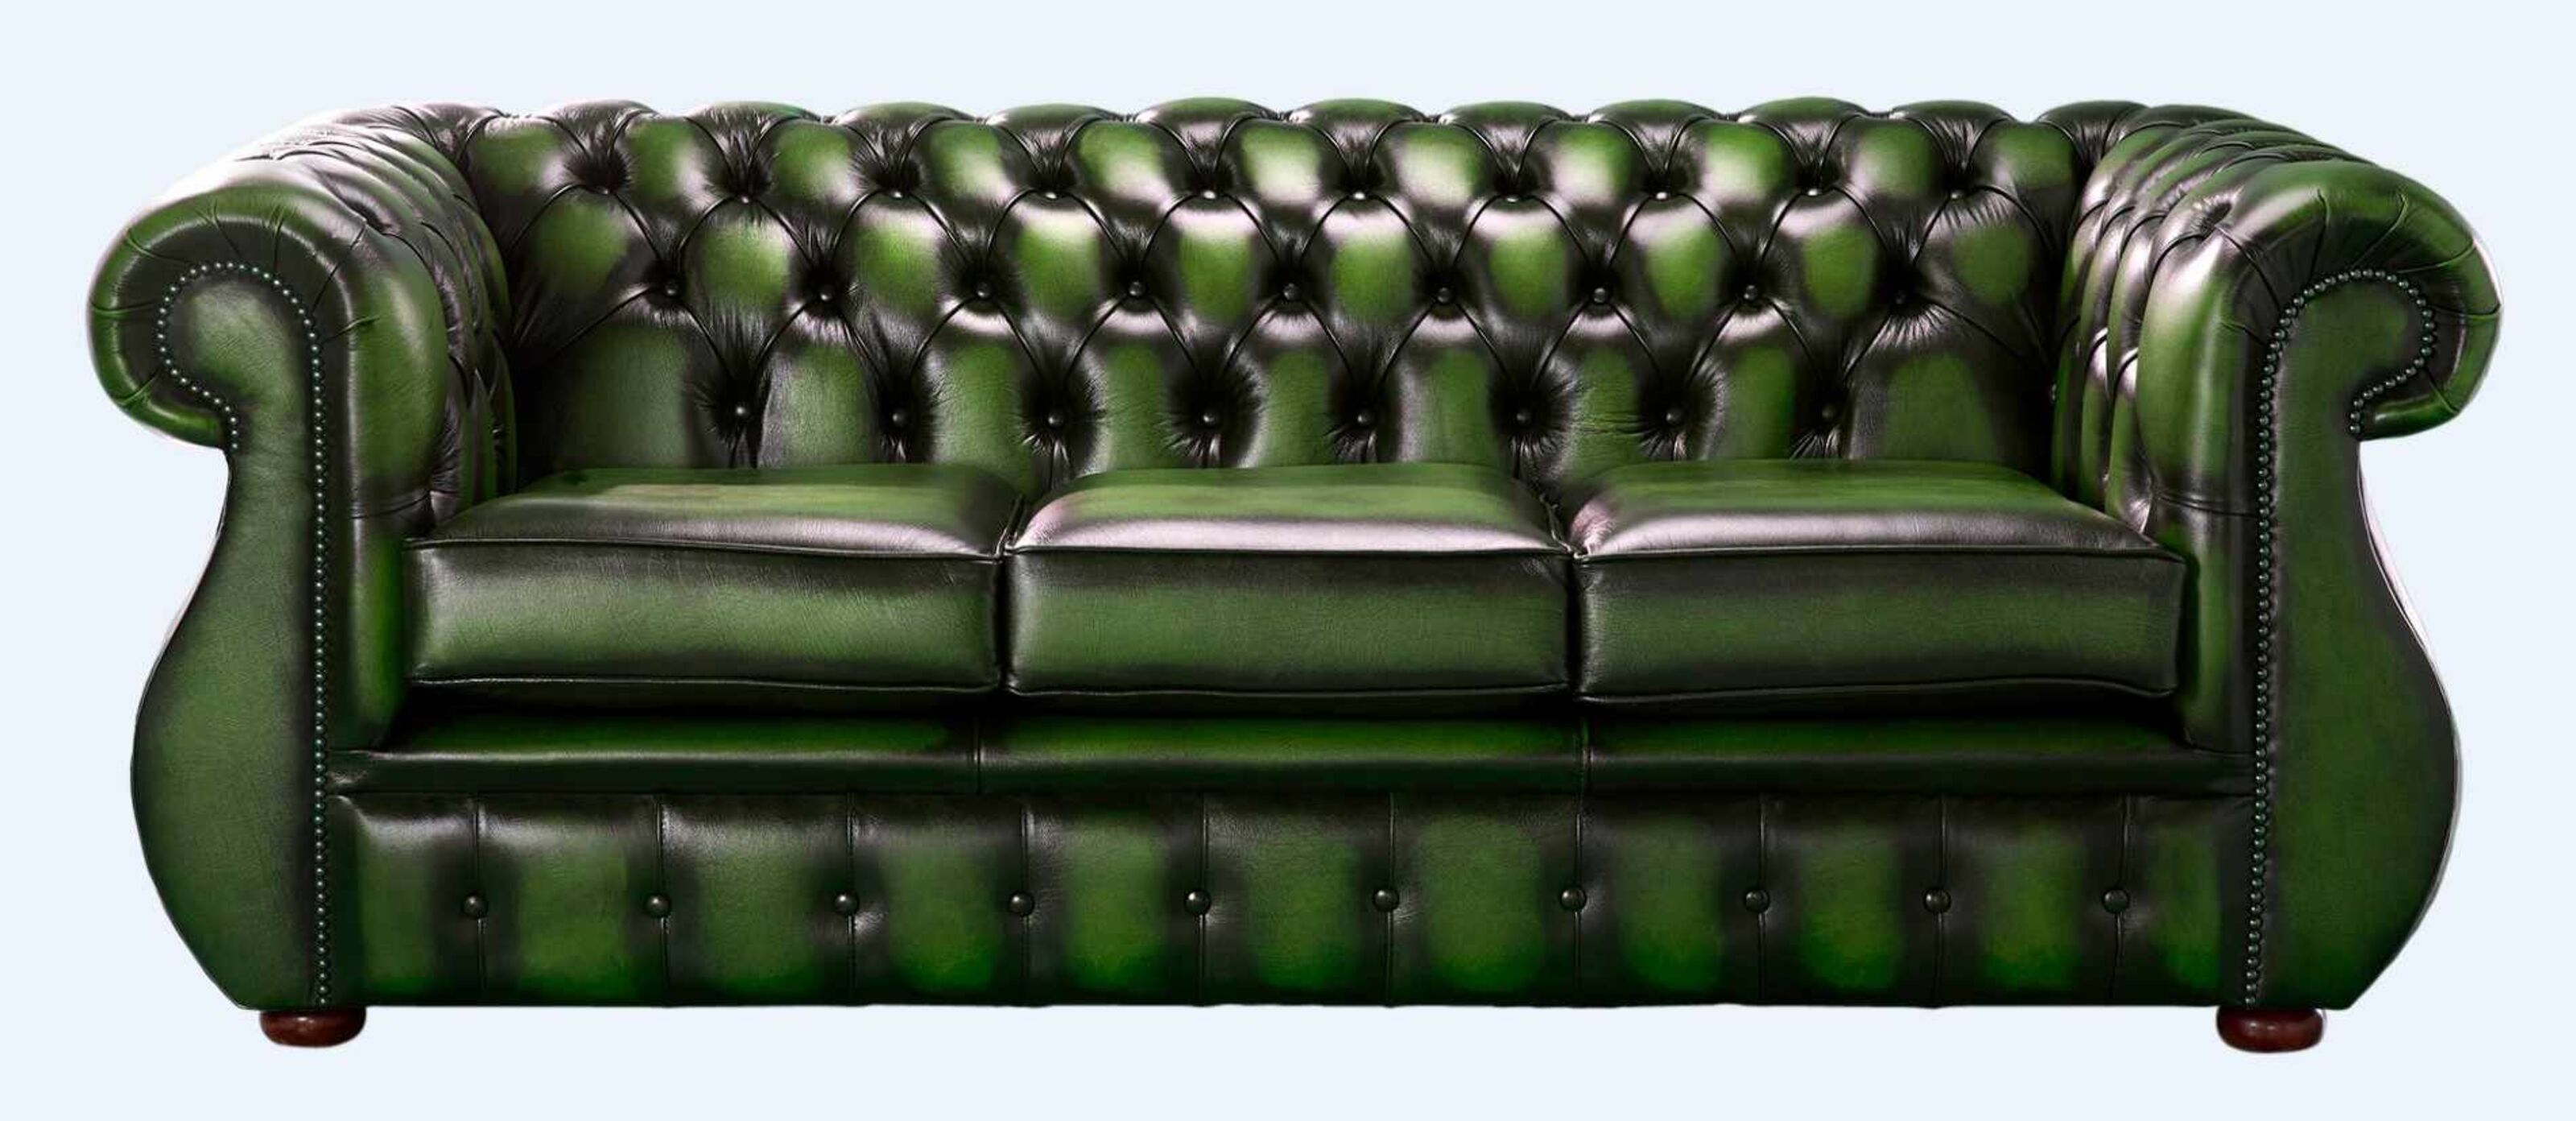 Chesterfield Sofas: Making a Timeless Statement  %Post Title